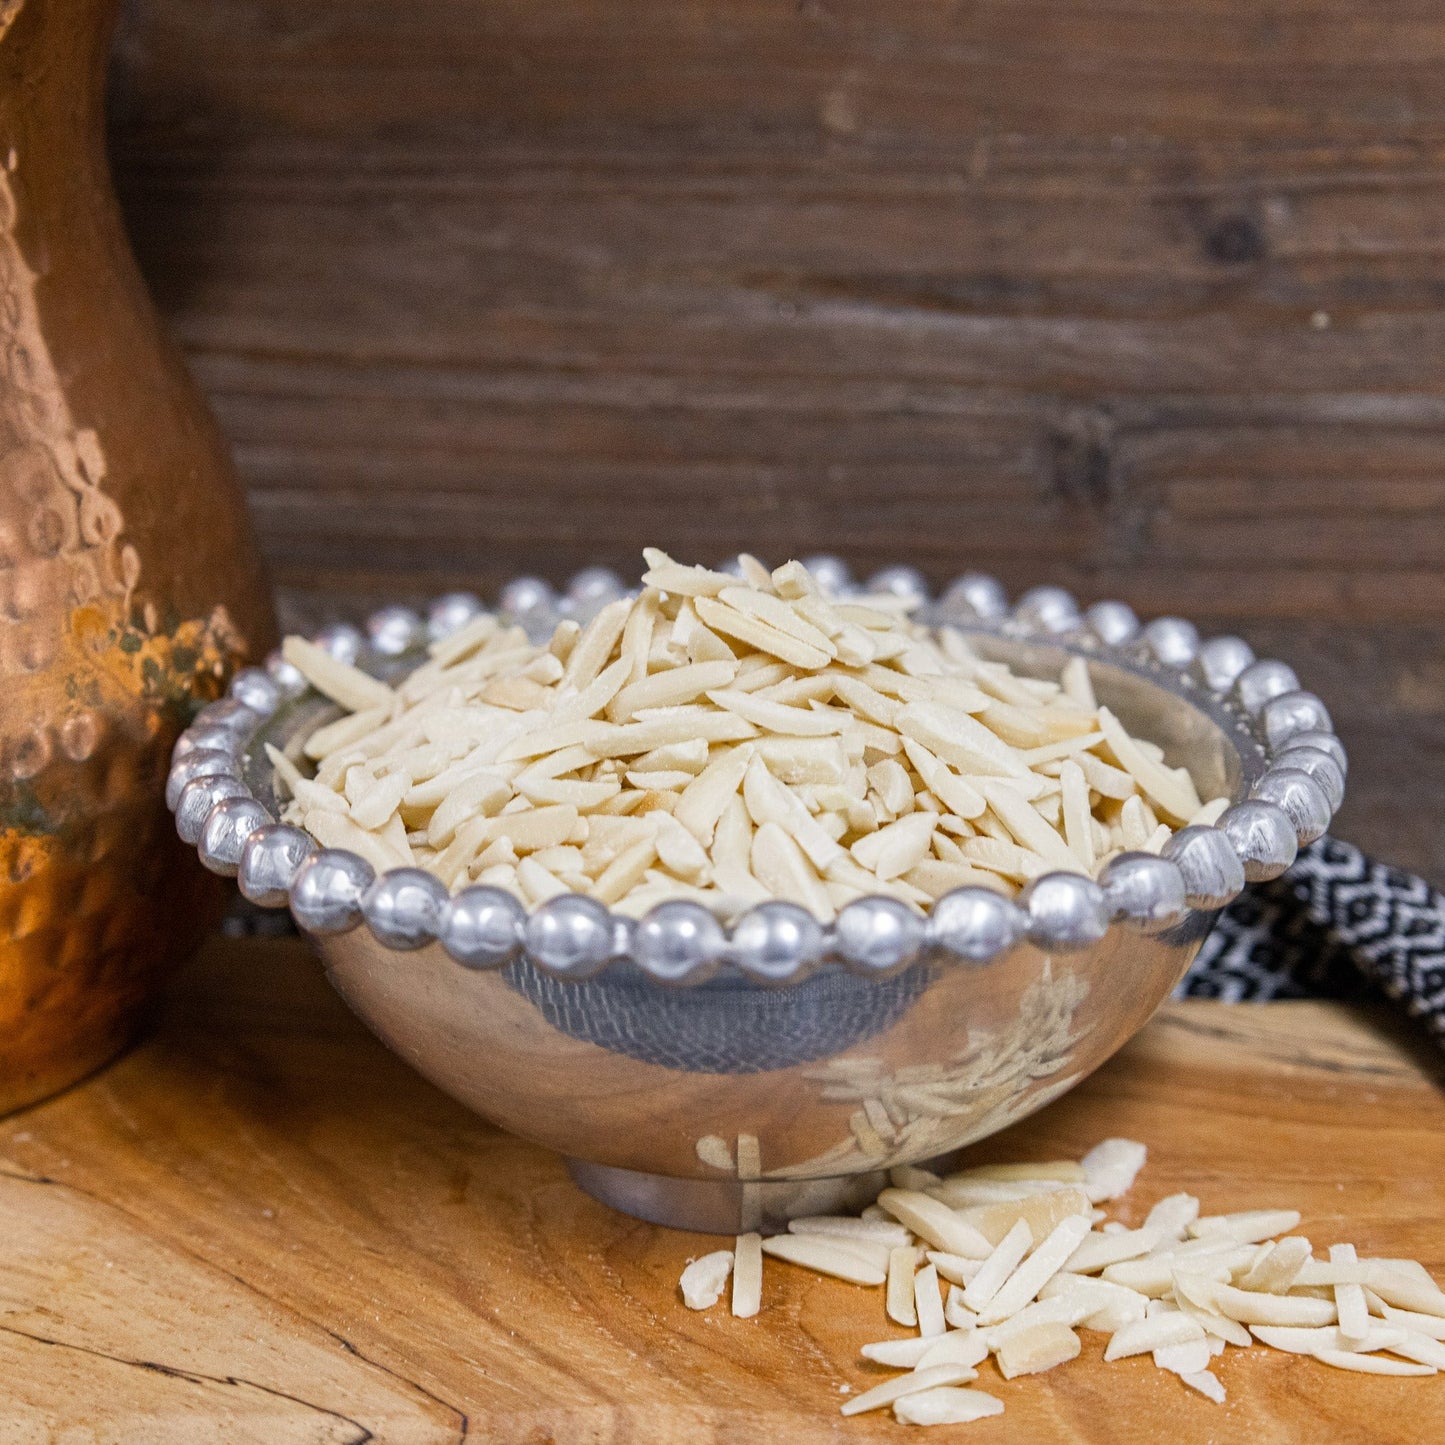 slivered raw almonds blanched in beaded pewter bowl